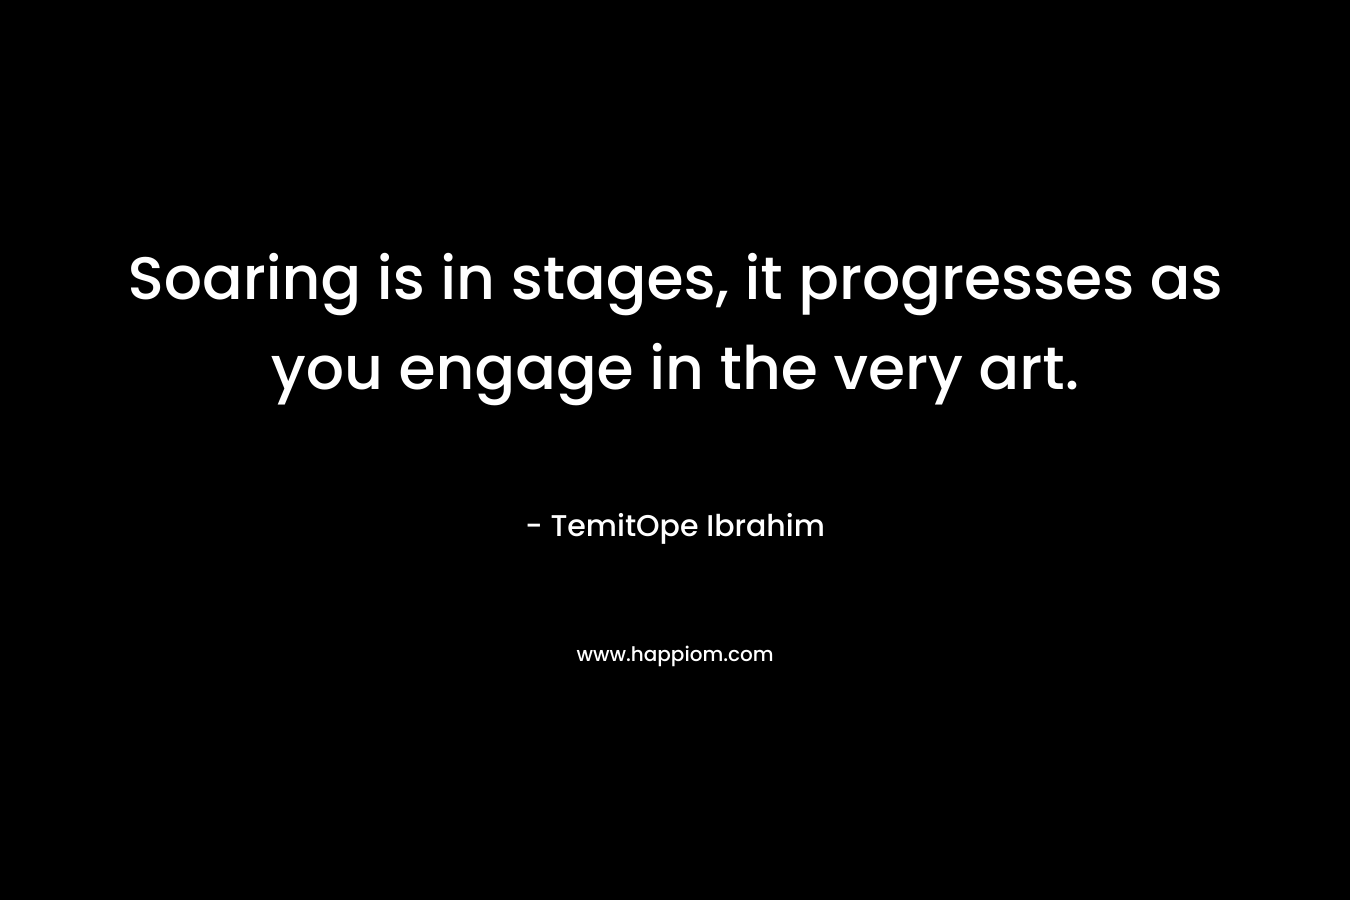 Soaring is in stages, it progresses as you engage in the very art. – TemitOpe Ibrahim